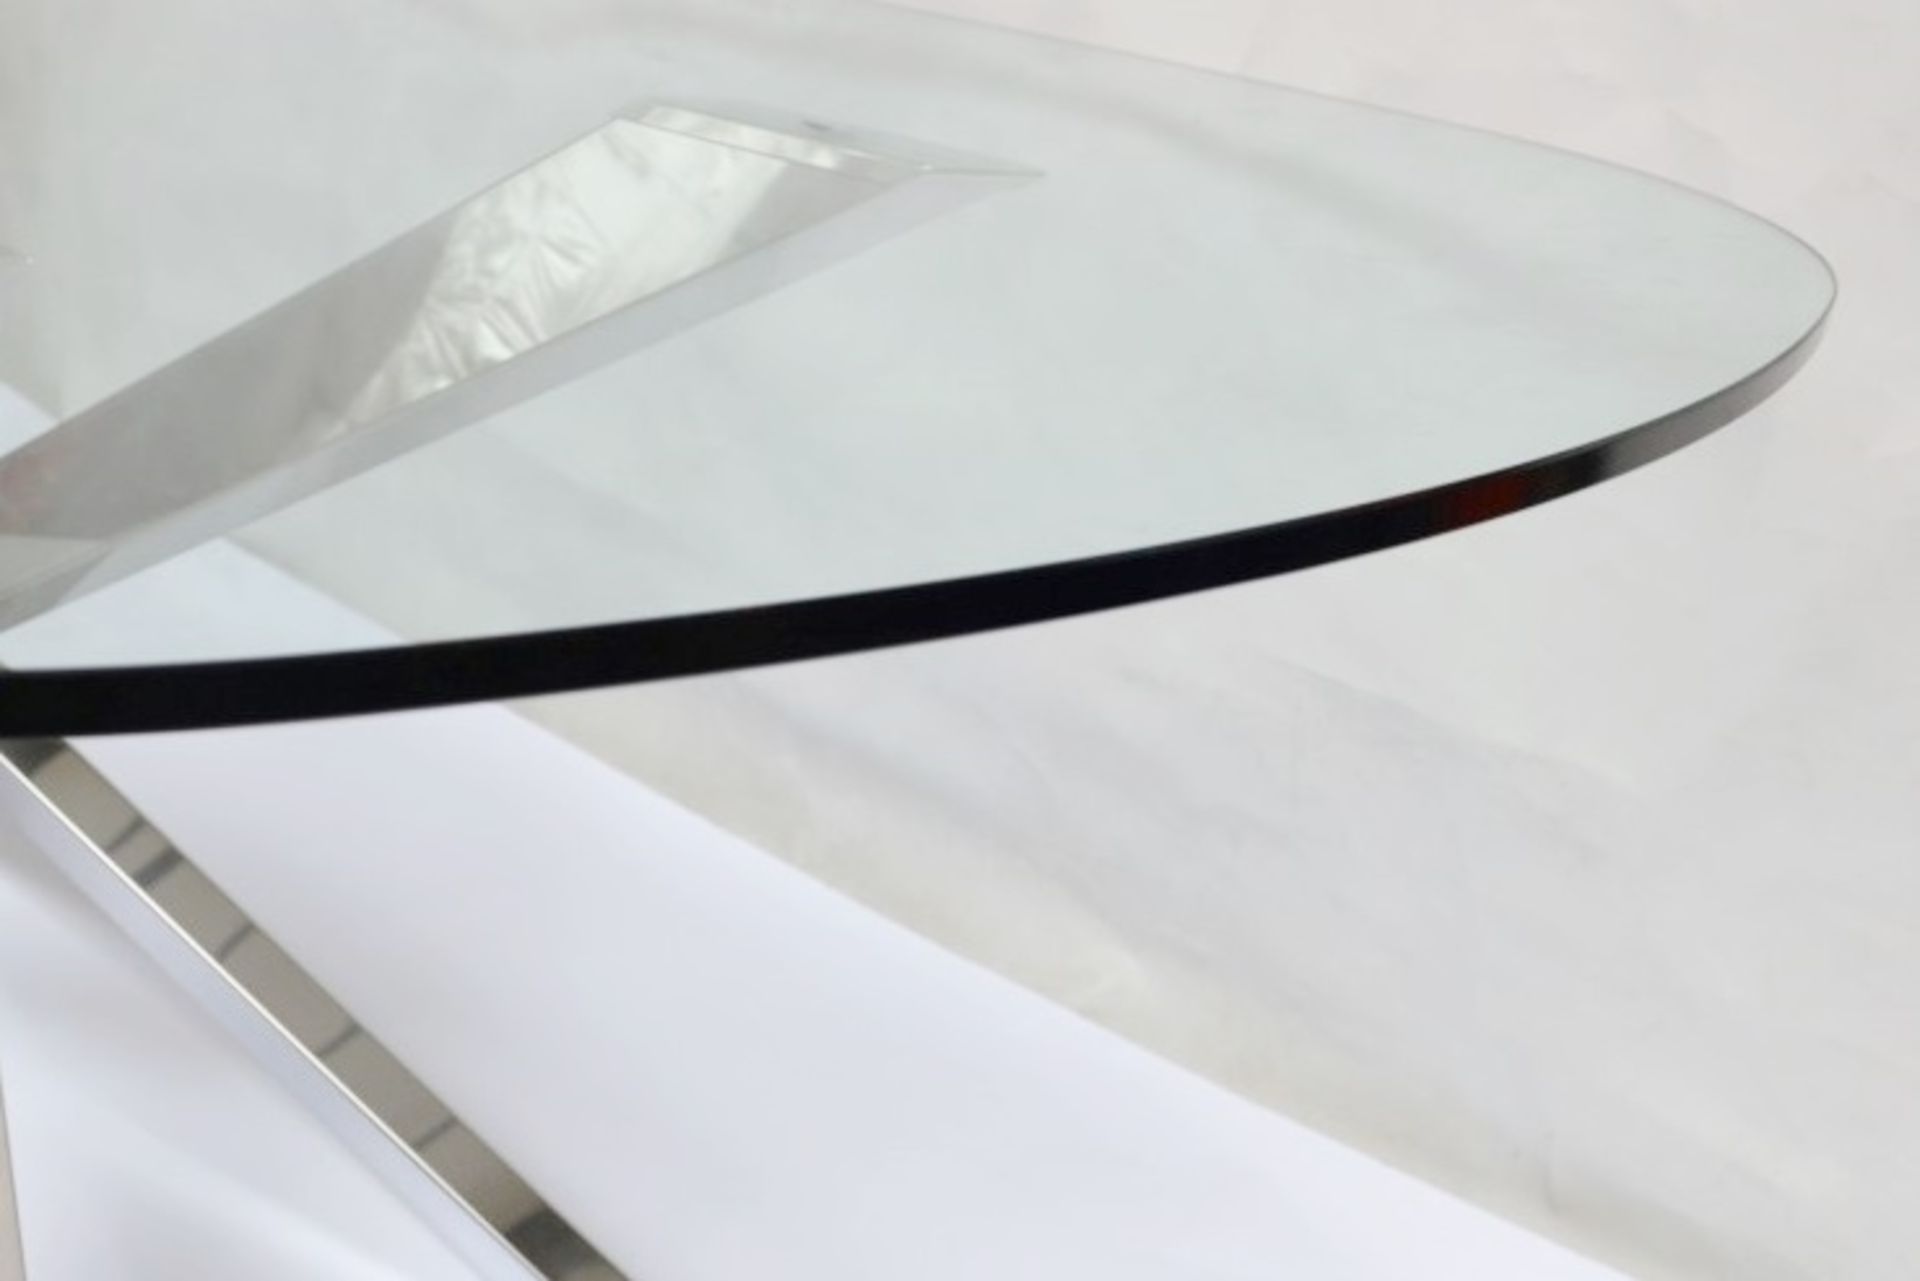 1 x CATTELAN "Spyder" Glass Topped Table - Stunning Piece In Great Condition - Dimensions: - Image 6 of 6